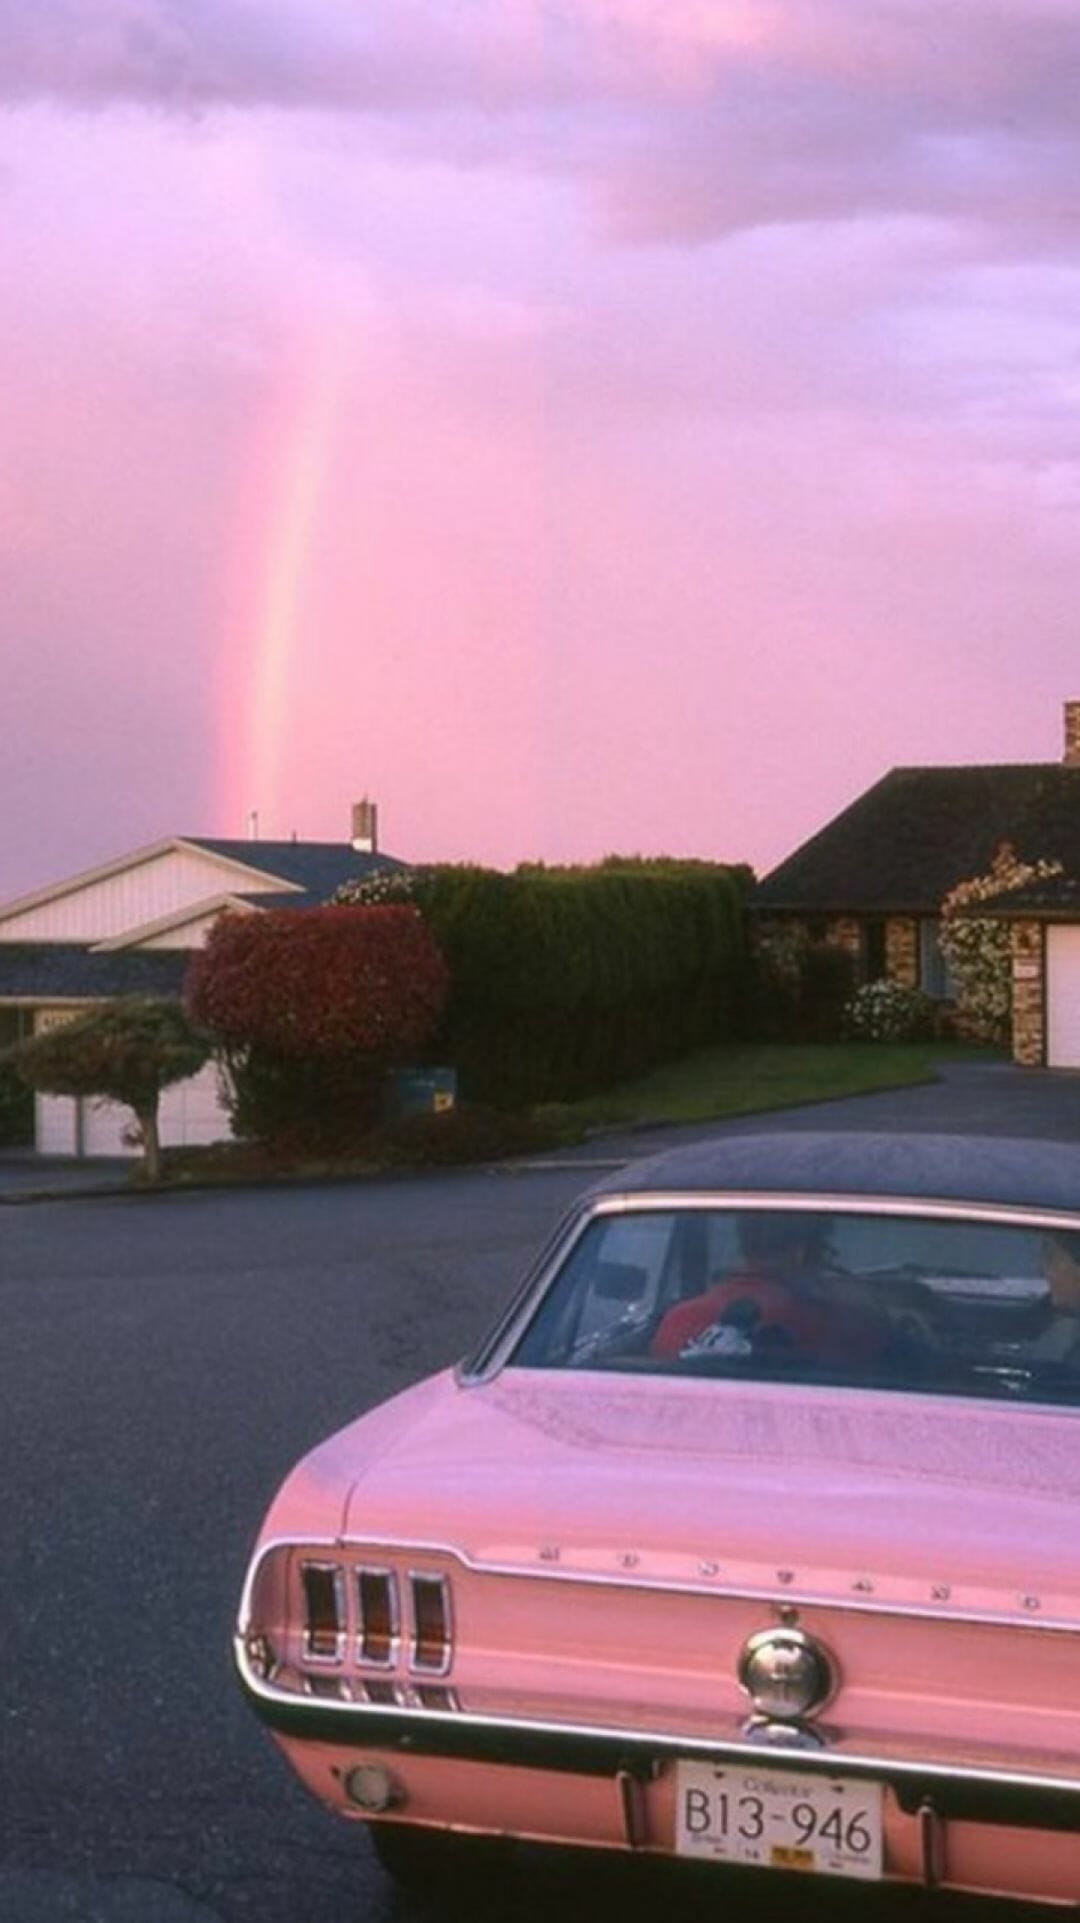 A pink car in front of a rainbow - Vintage, retro